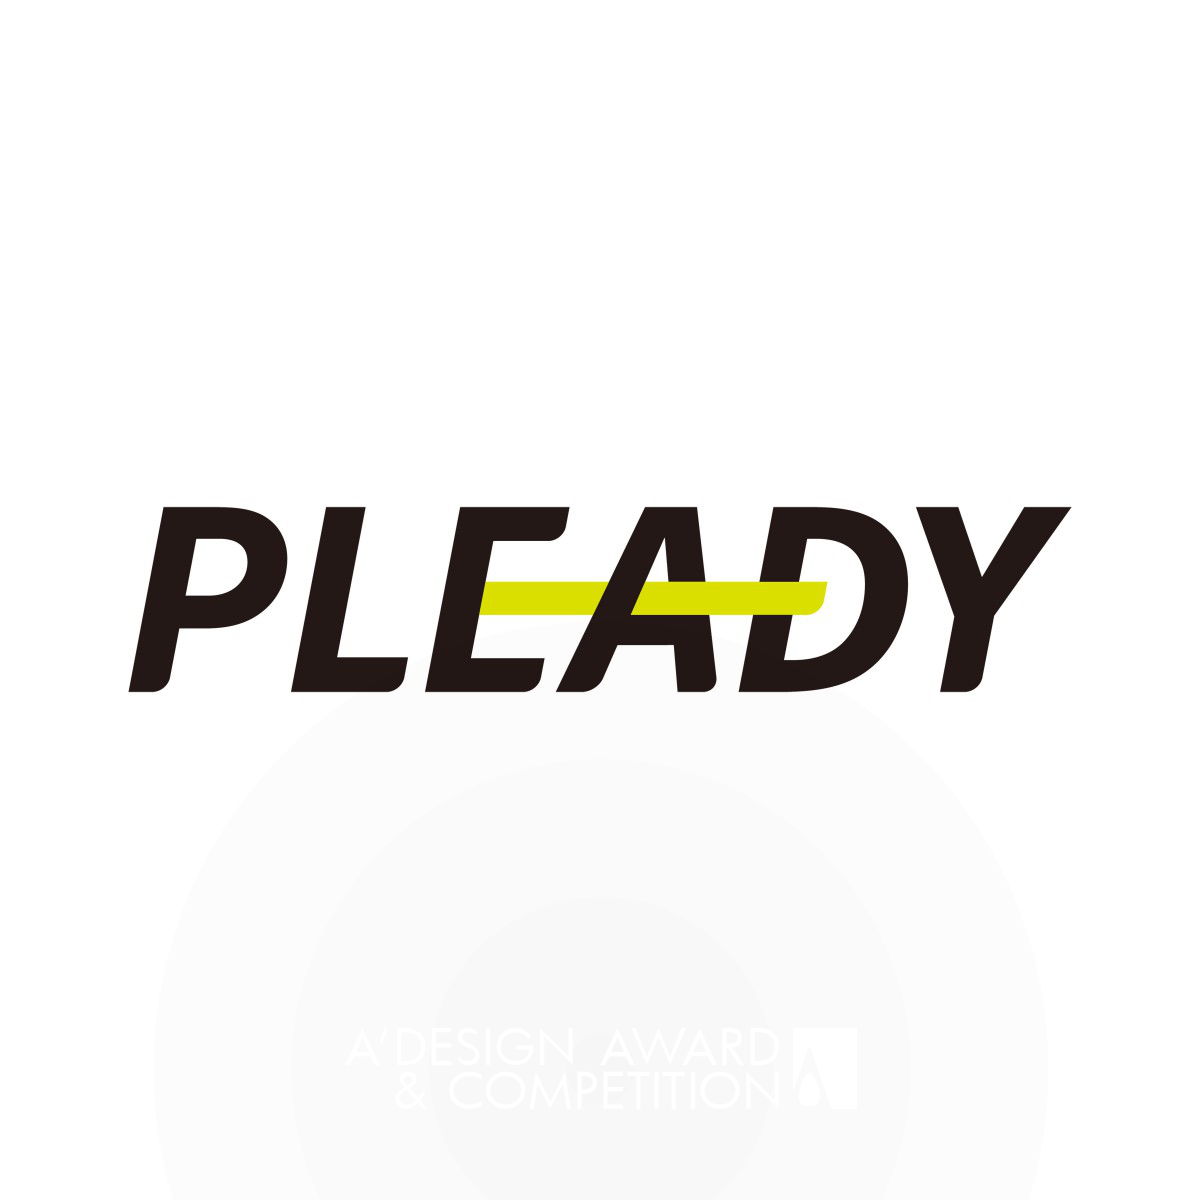 Pleady <b>Brand Elements and Communication Tools